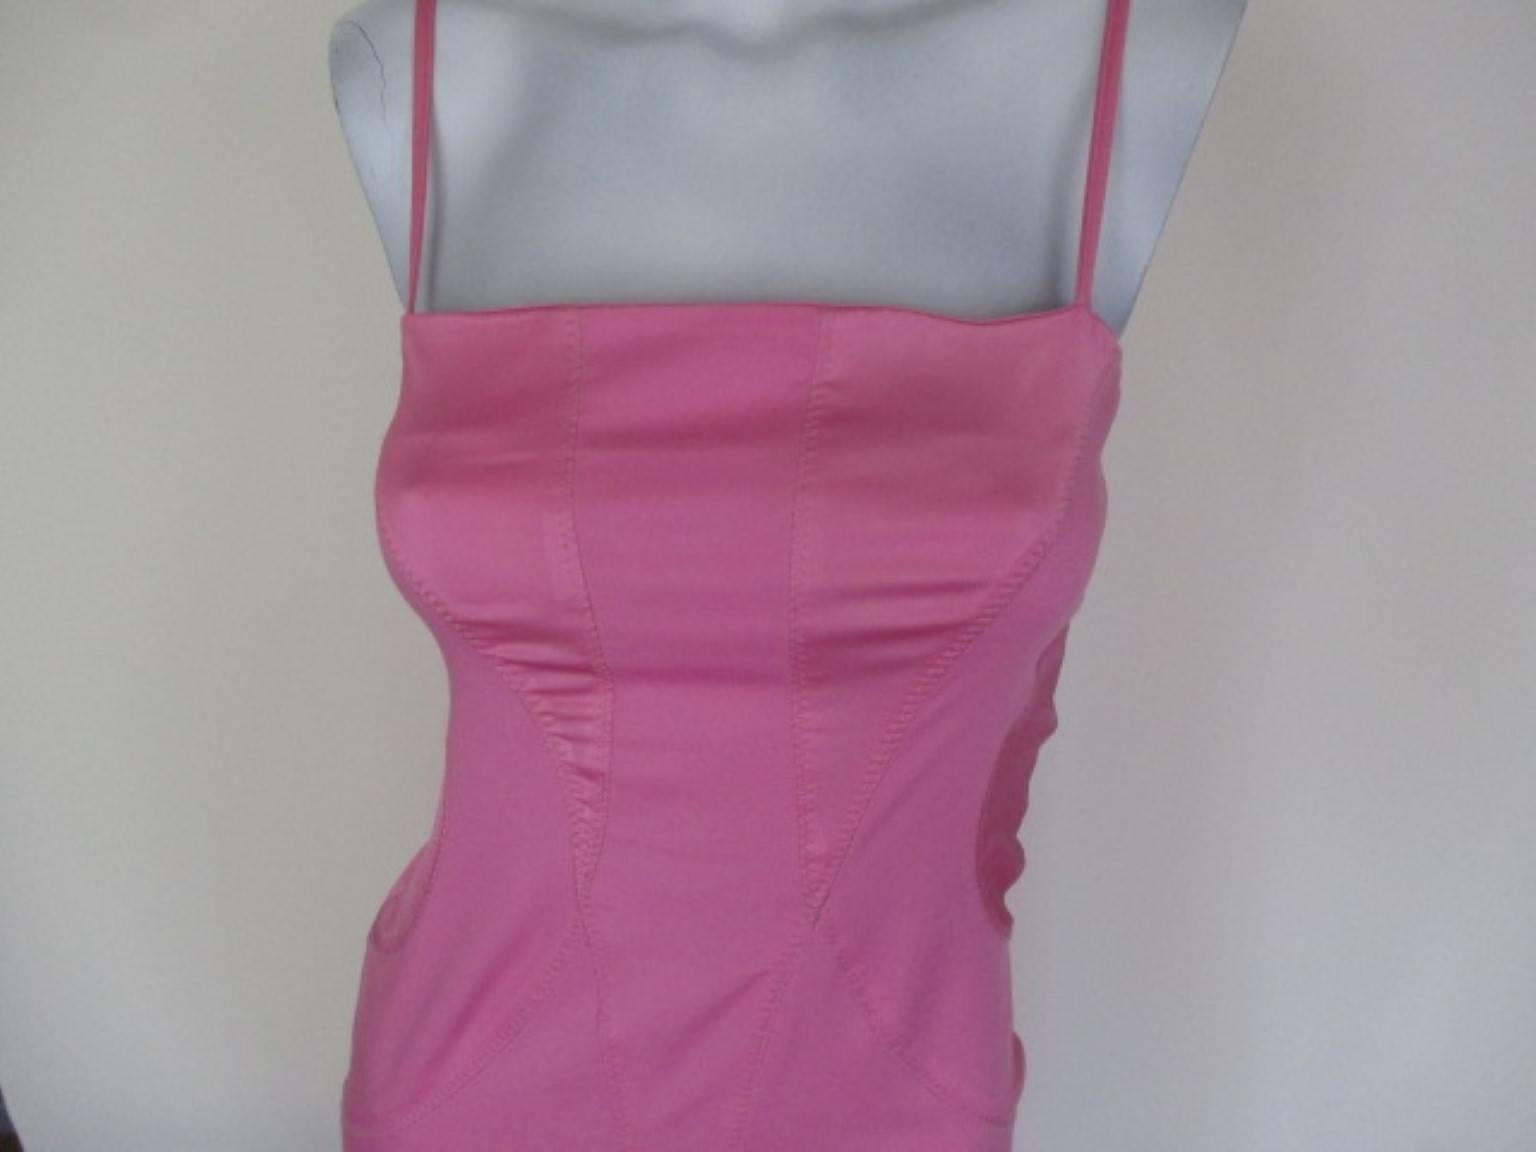 Thierry Mugler Dress

We offer more exclusive vintage items, view our frontstore

This vintage spaghetti strapped pink tailored mini dress consists of satin inserts as well as cross stitching on both the backside as well as the front side of the